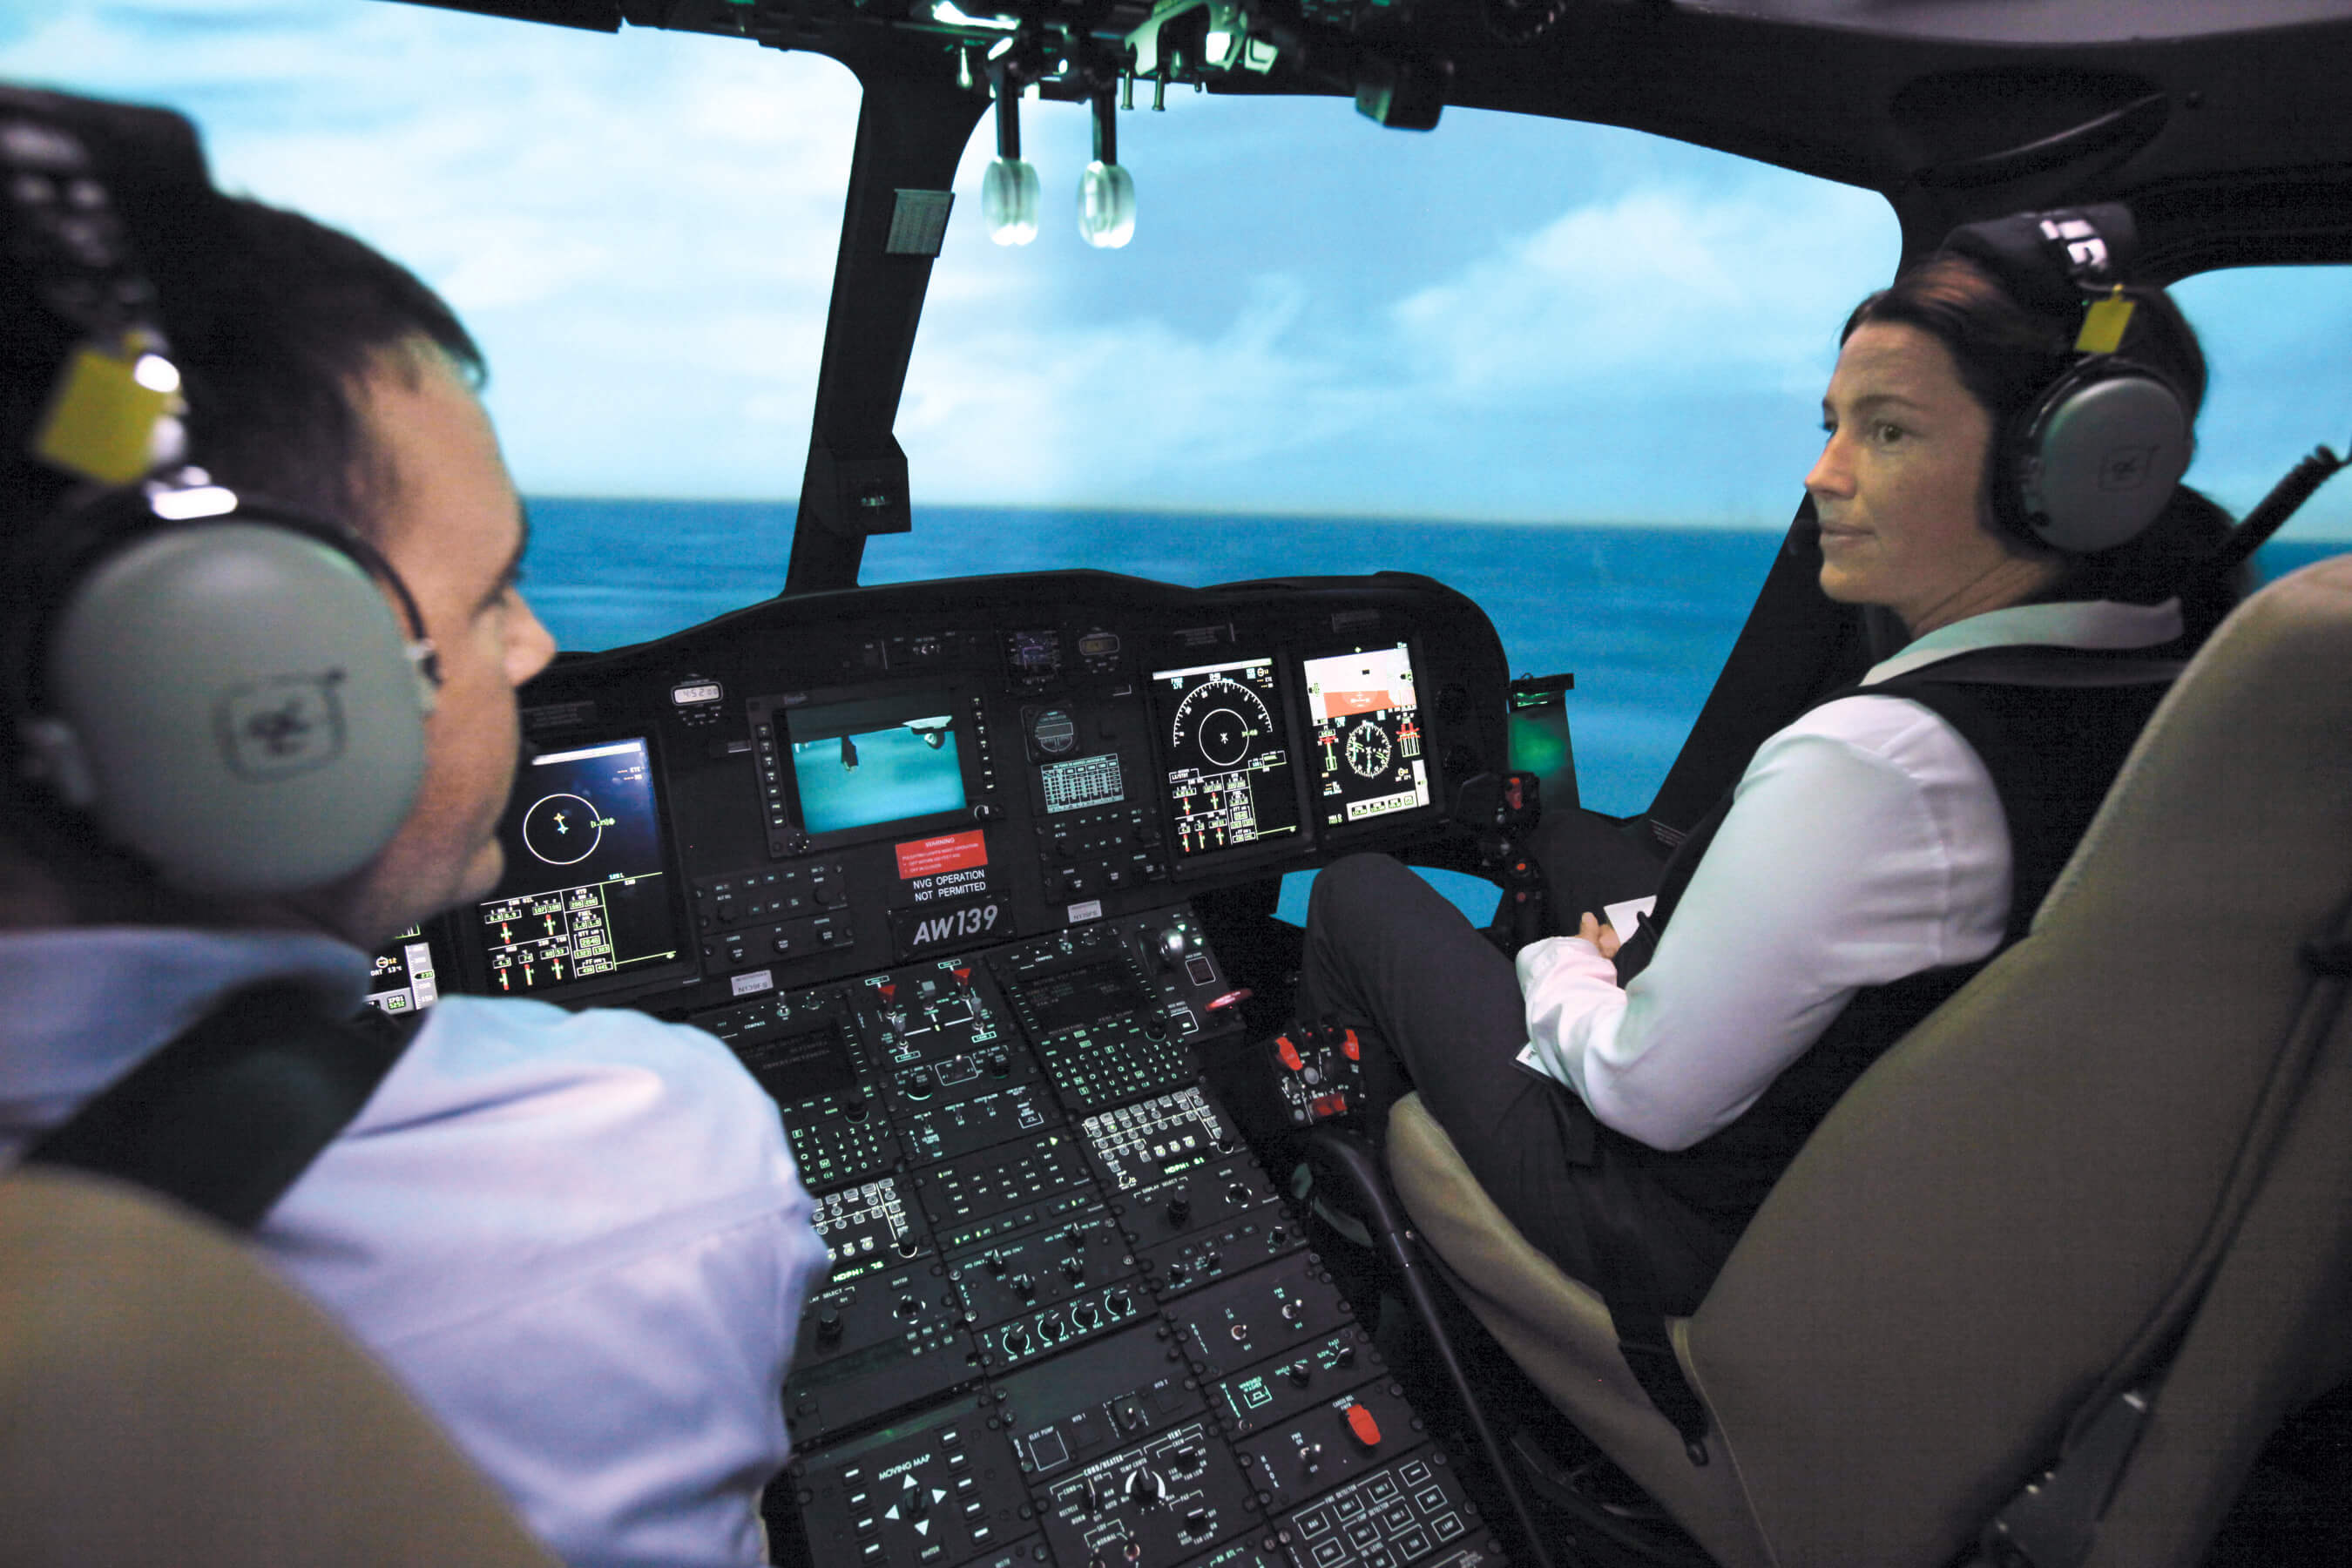 The advances in technology incorporated into the new EC145 and AW139 simulators include FlightSafety’s industry-leading VITAL 1150 visual system and CrewView collimated glass mirror display. FlightSafety Photo